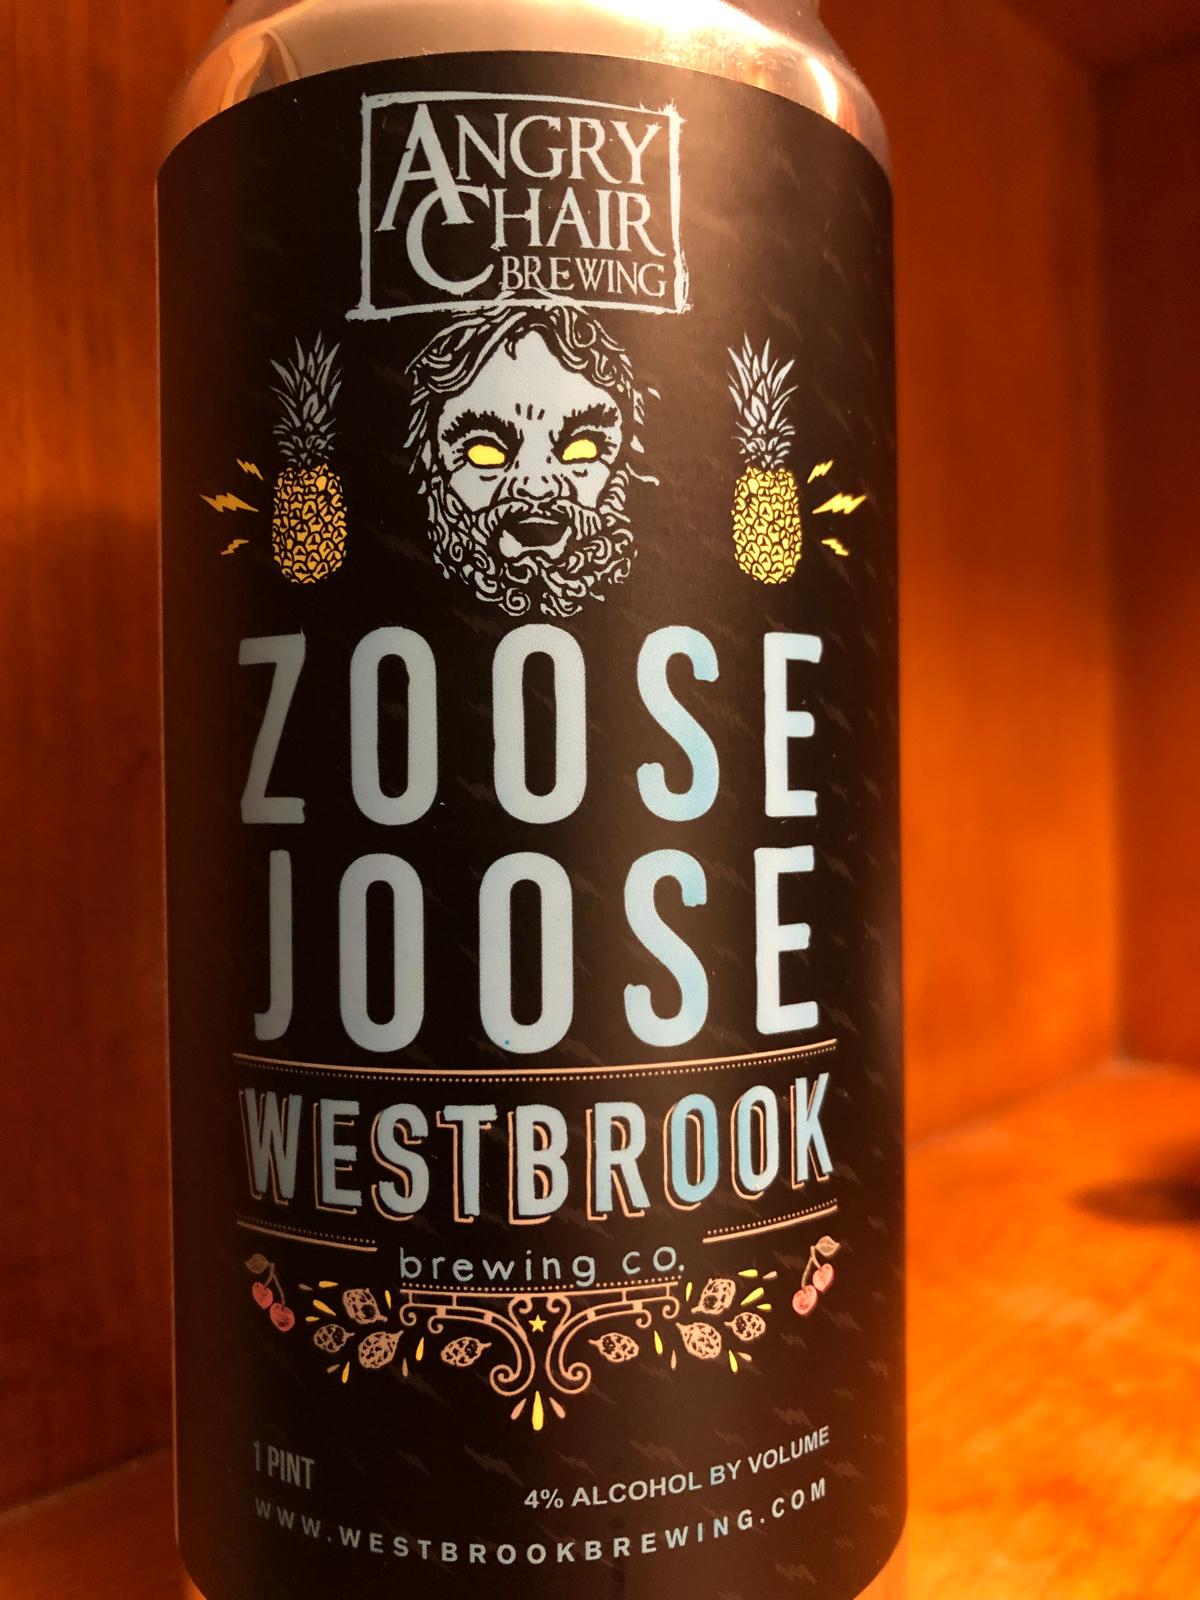 Zoose Joose (Collaboration with Angry Chair)